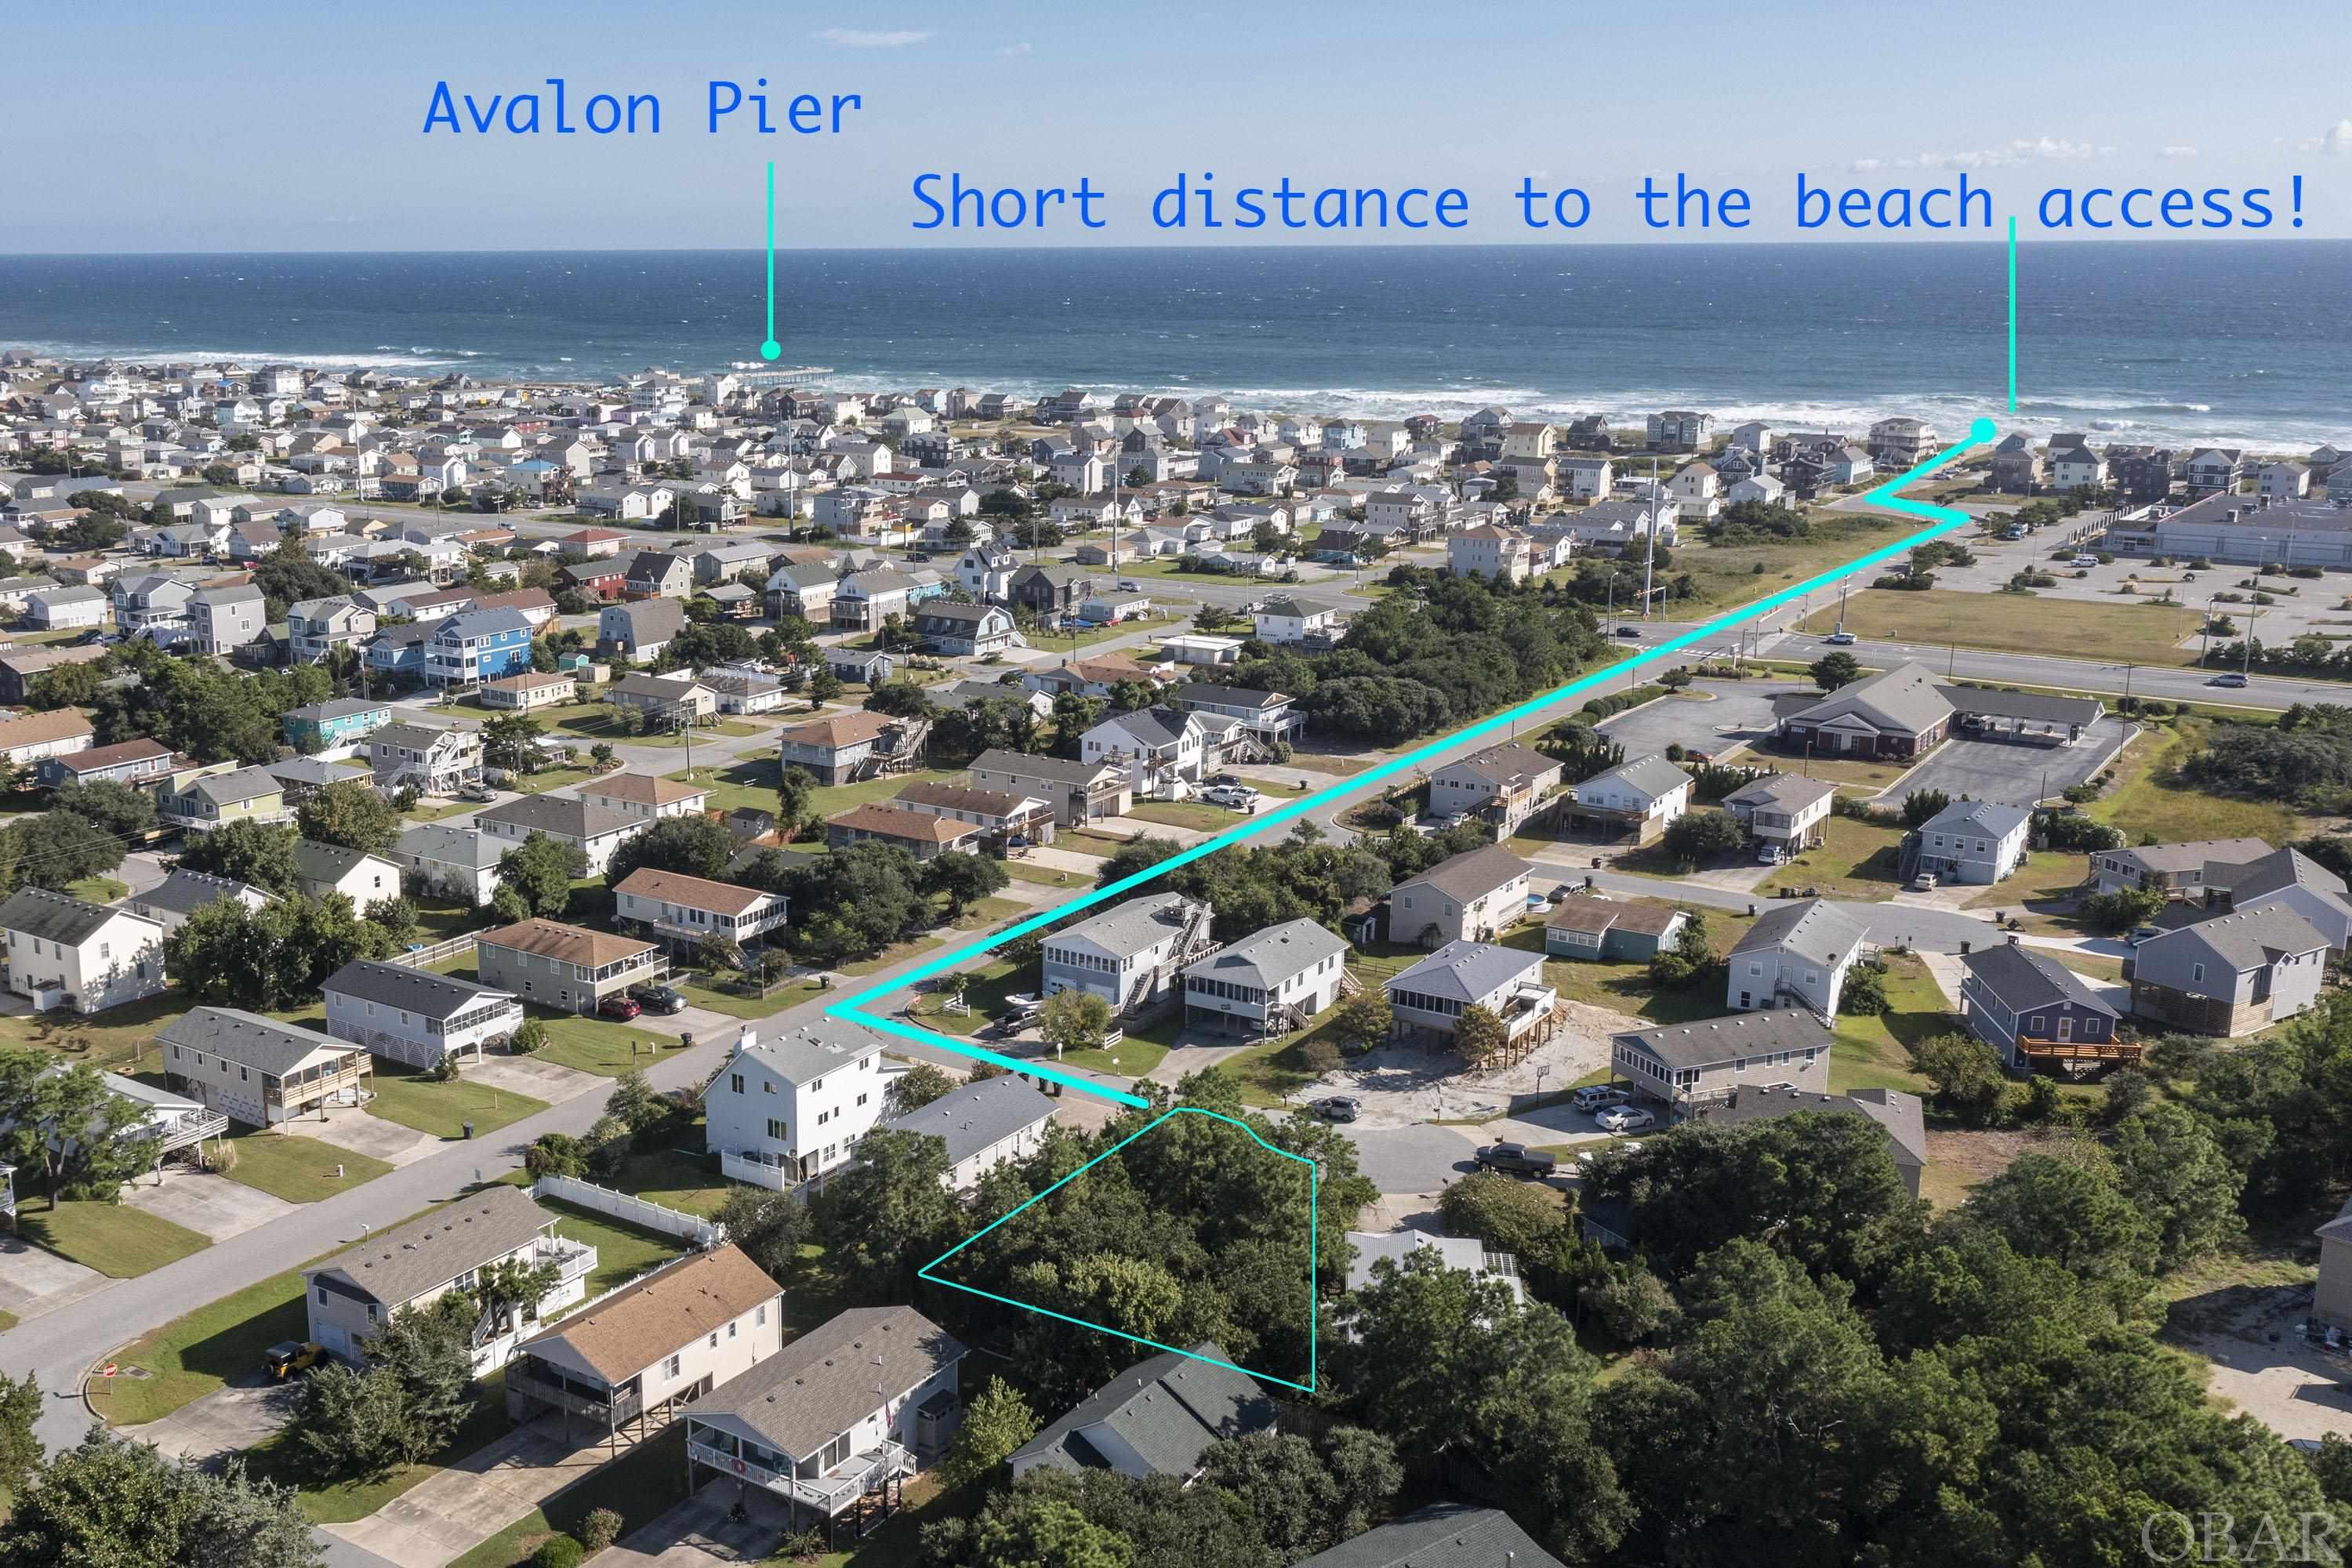 Great Central Kill Devil Hills Location - X Flood Zone!  Short walk to the beach via lighted crosswalk at Fifth Street.  Restaurants and shops are also nearby.  There is a possibility of an ocean view from a 2nd floor reverse floor plan.  Don't miss this opportunity to own a slice of paradise.  Call today!